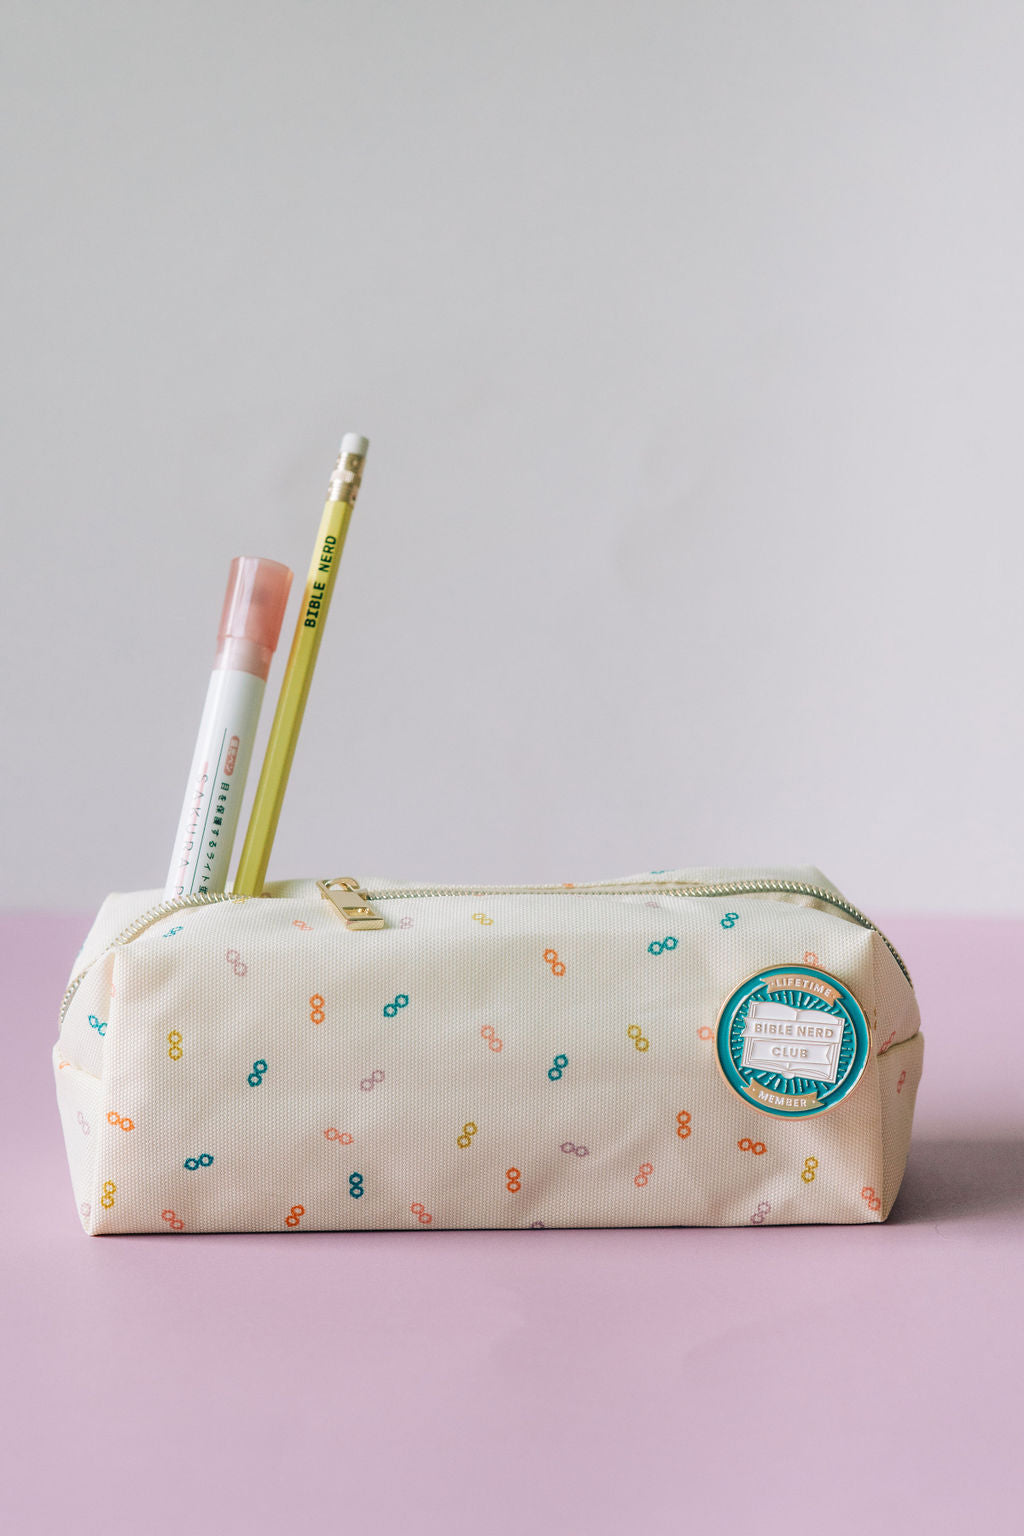 Personalized Pencil Pouch with Zipper, Student Personalized Pencil Pouch  for kids Cute Pencil Case, Pencil Holder for Teen, Bible Journal